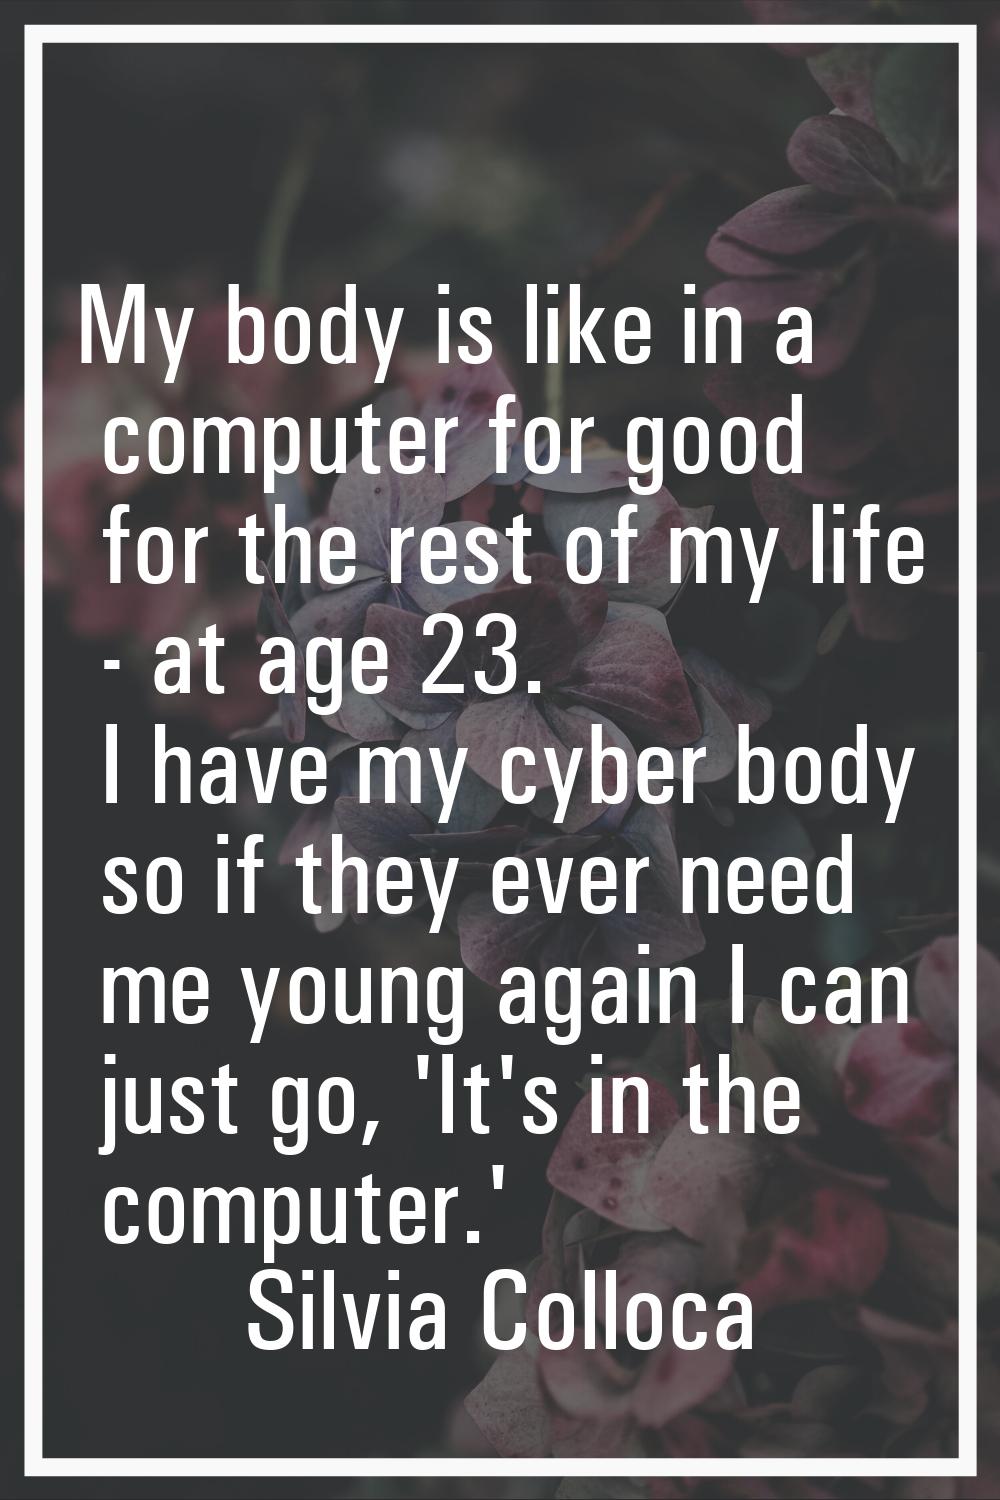 My body is like in a computer for good for the rest of my life - at age 23. I have my cyber body so